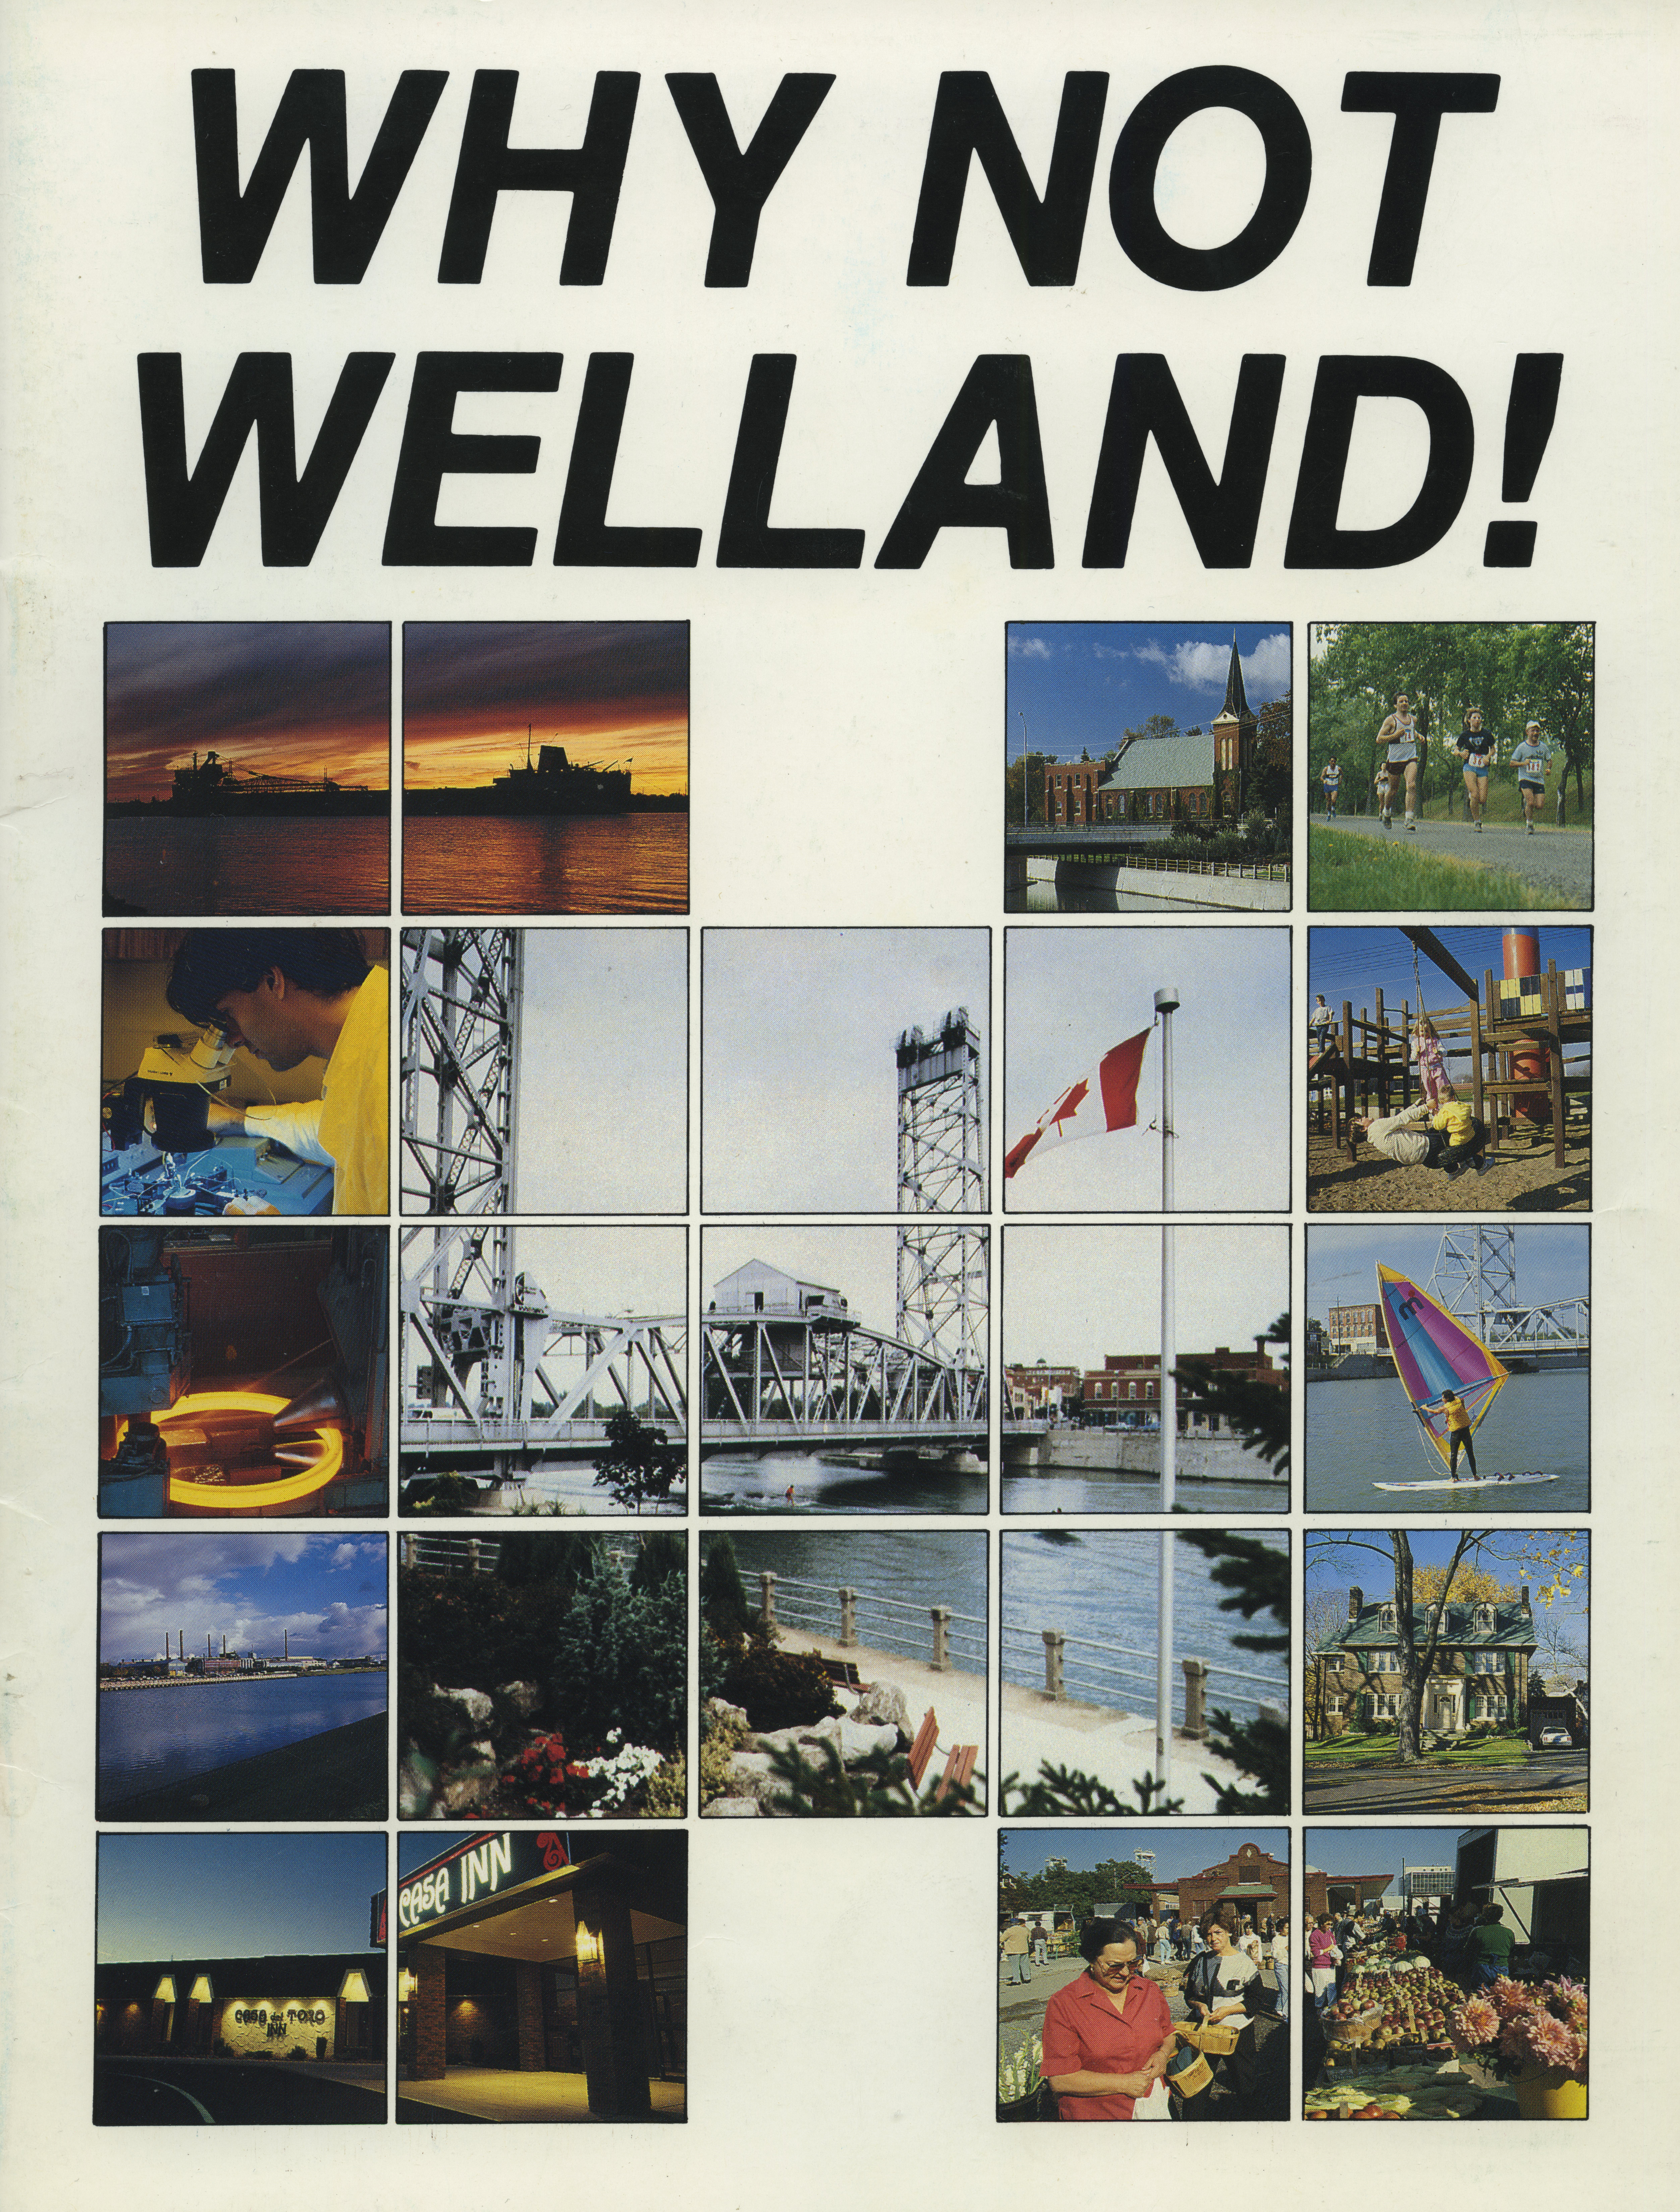 A page titled "why not Welland!" with a collage of small images underneath.